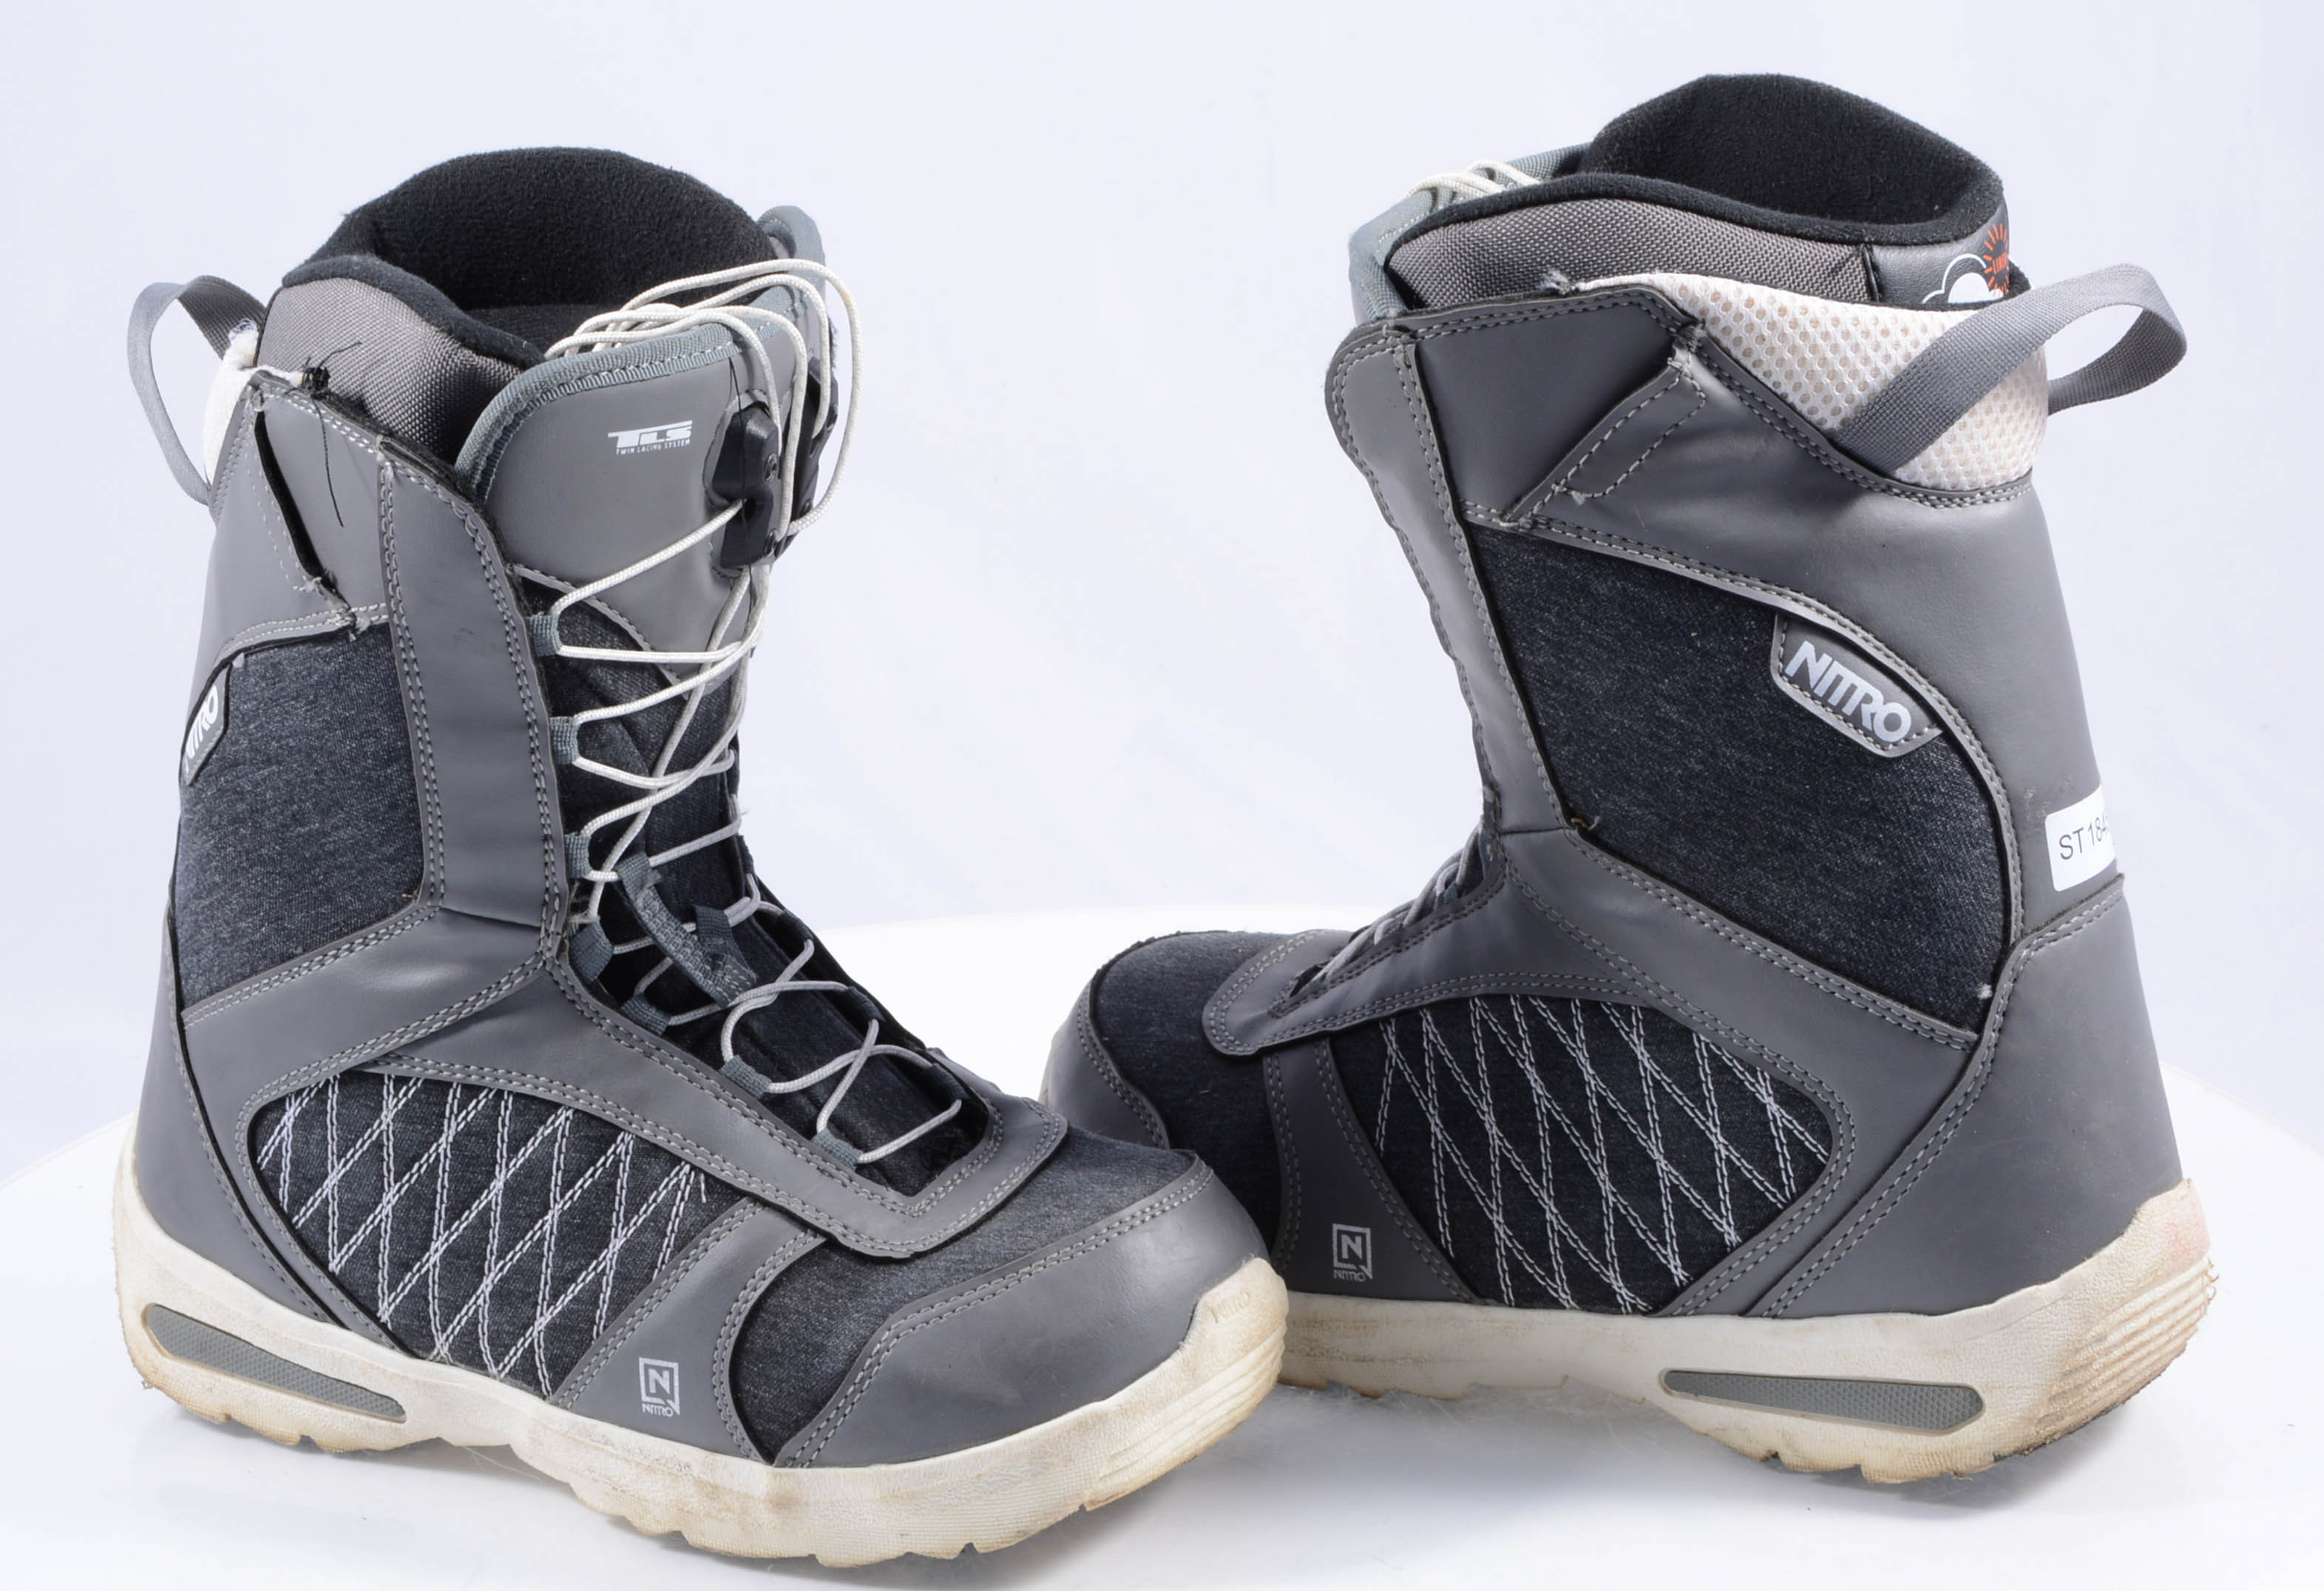 snowboard boots NITRO FLORA TLS, Twin Lacing Liner Lacing, TPR Outsole, Grey ( TOP condition ) - Mardosport.co.uk